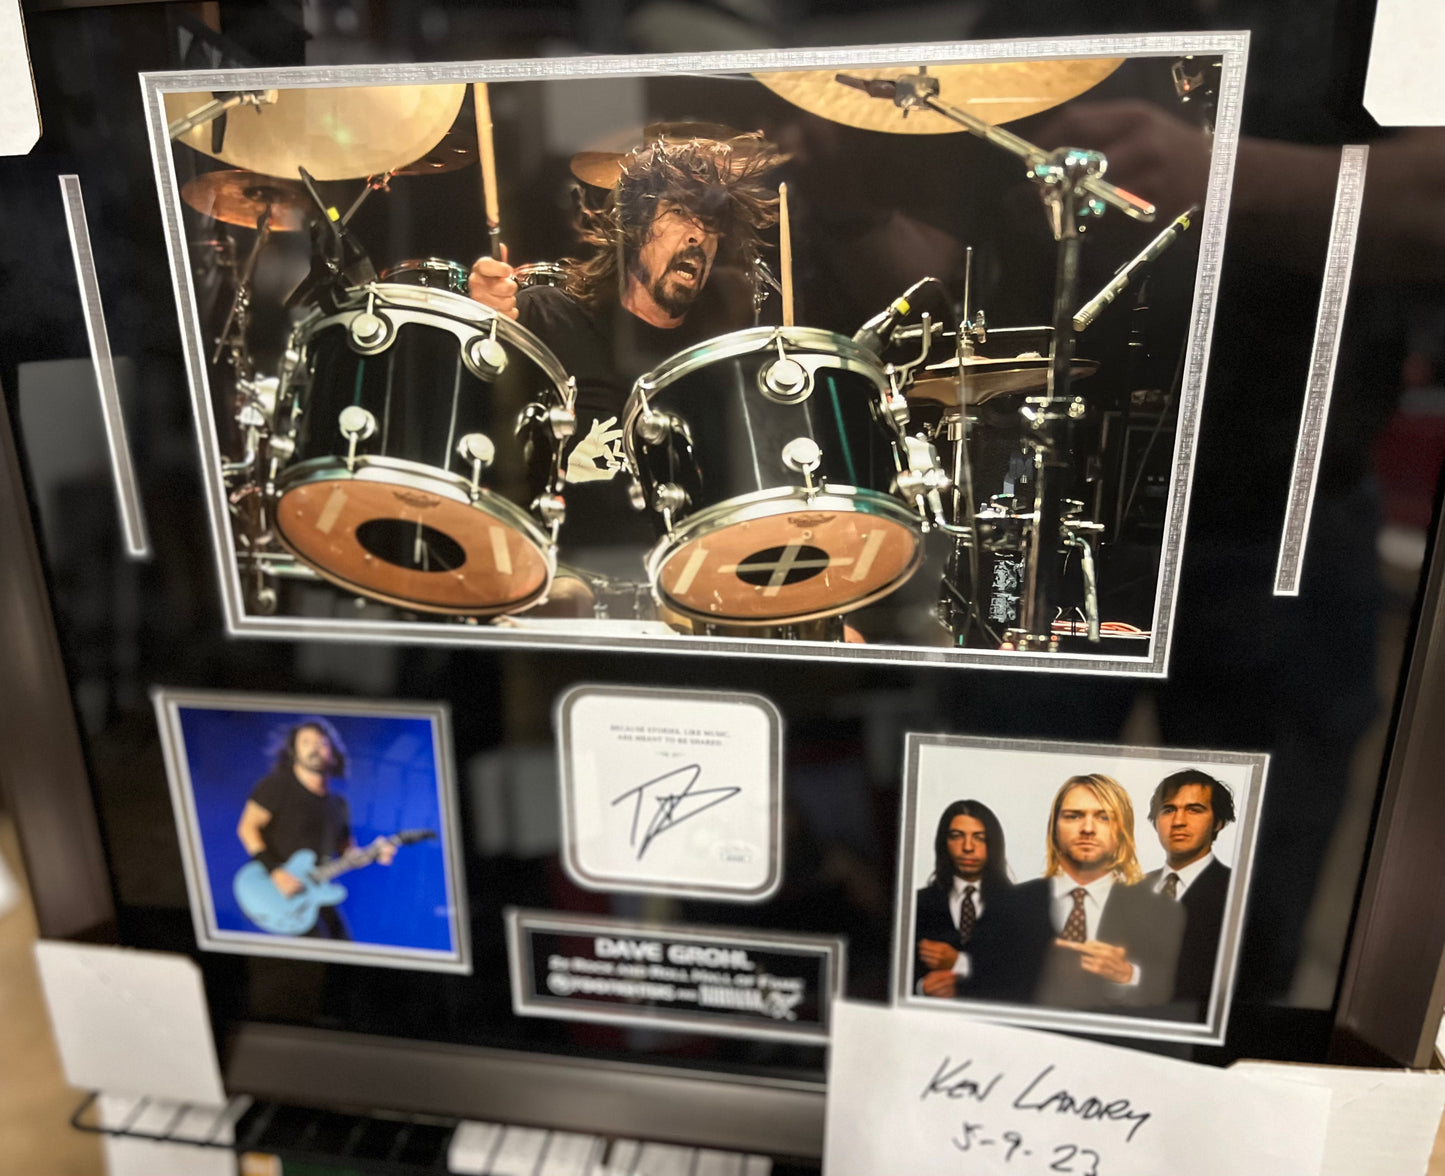 Foo Fighters Dave Grohl signed cut autograph  Profressionally mattted and framed